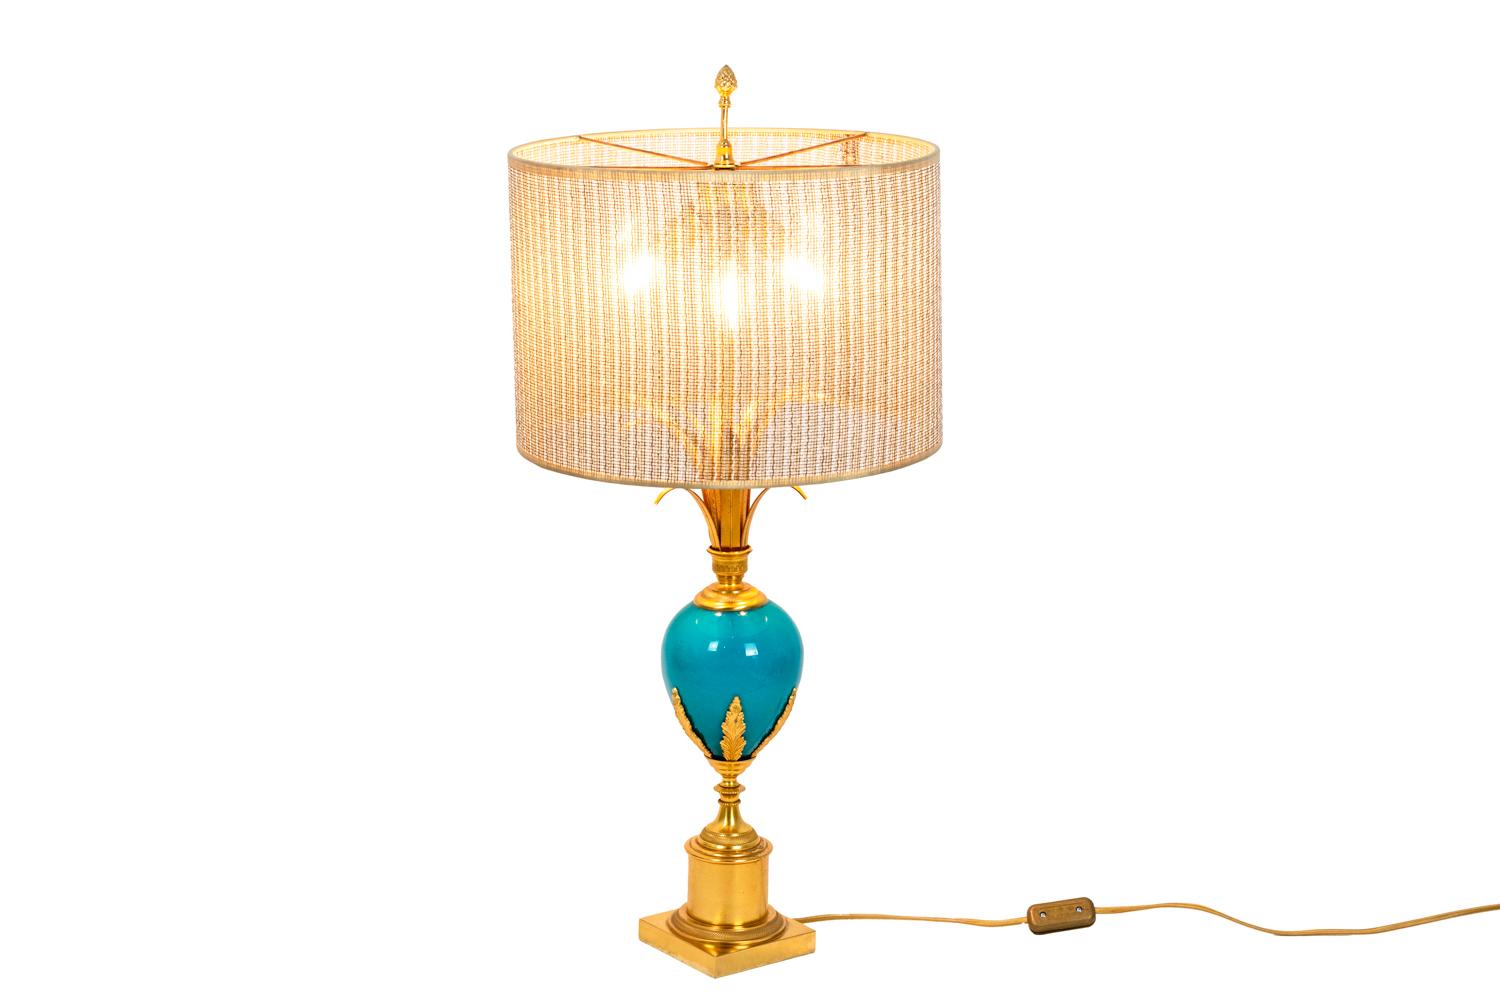 Lamp in turquoise opaline and gilt bronze with an egg shape shaft topped by reeds leaves and finished by acanthus leaves. Lamp topped by a pine cone and finished by a brushed bronze cylinder decorated with swirls. Square base.

Work realized in